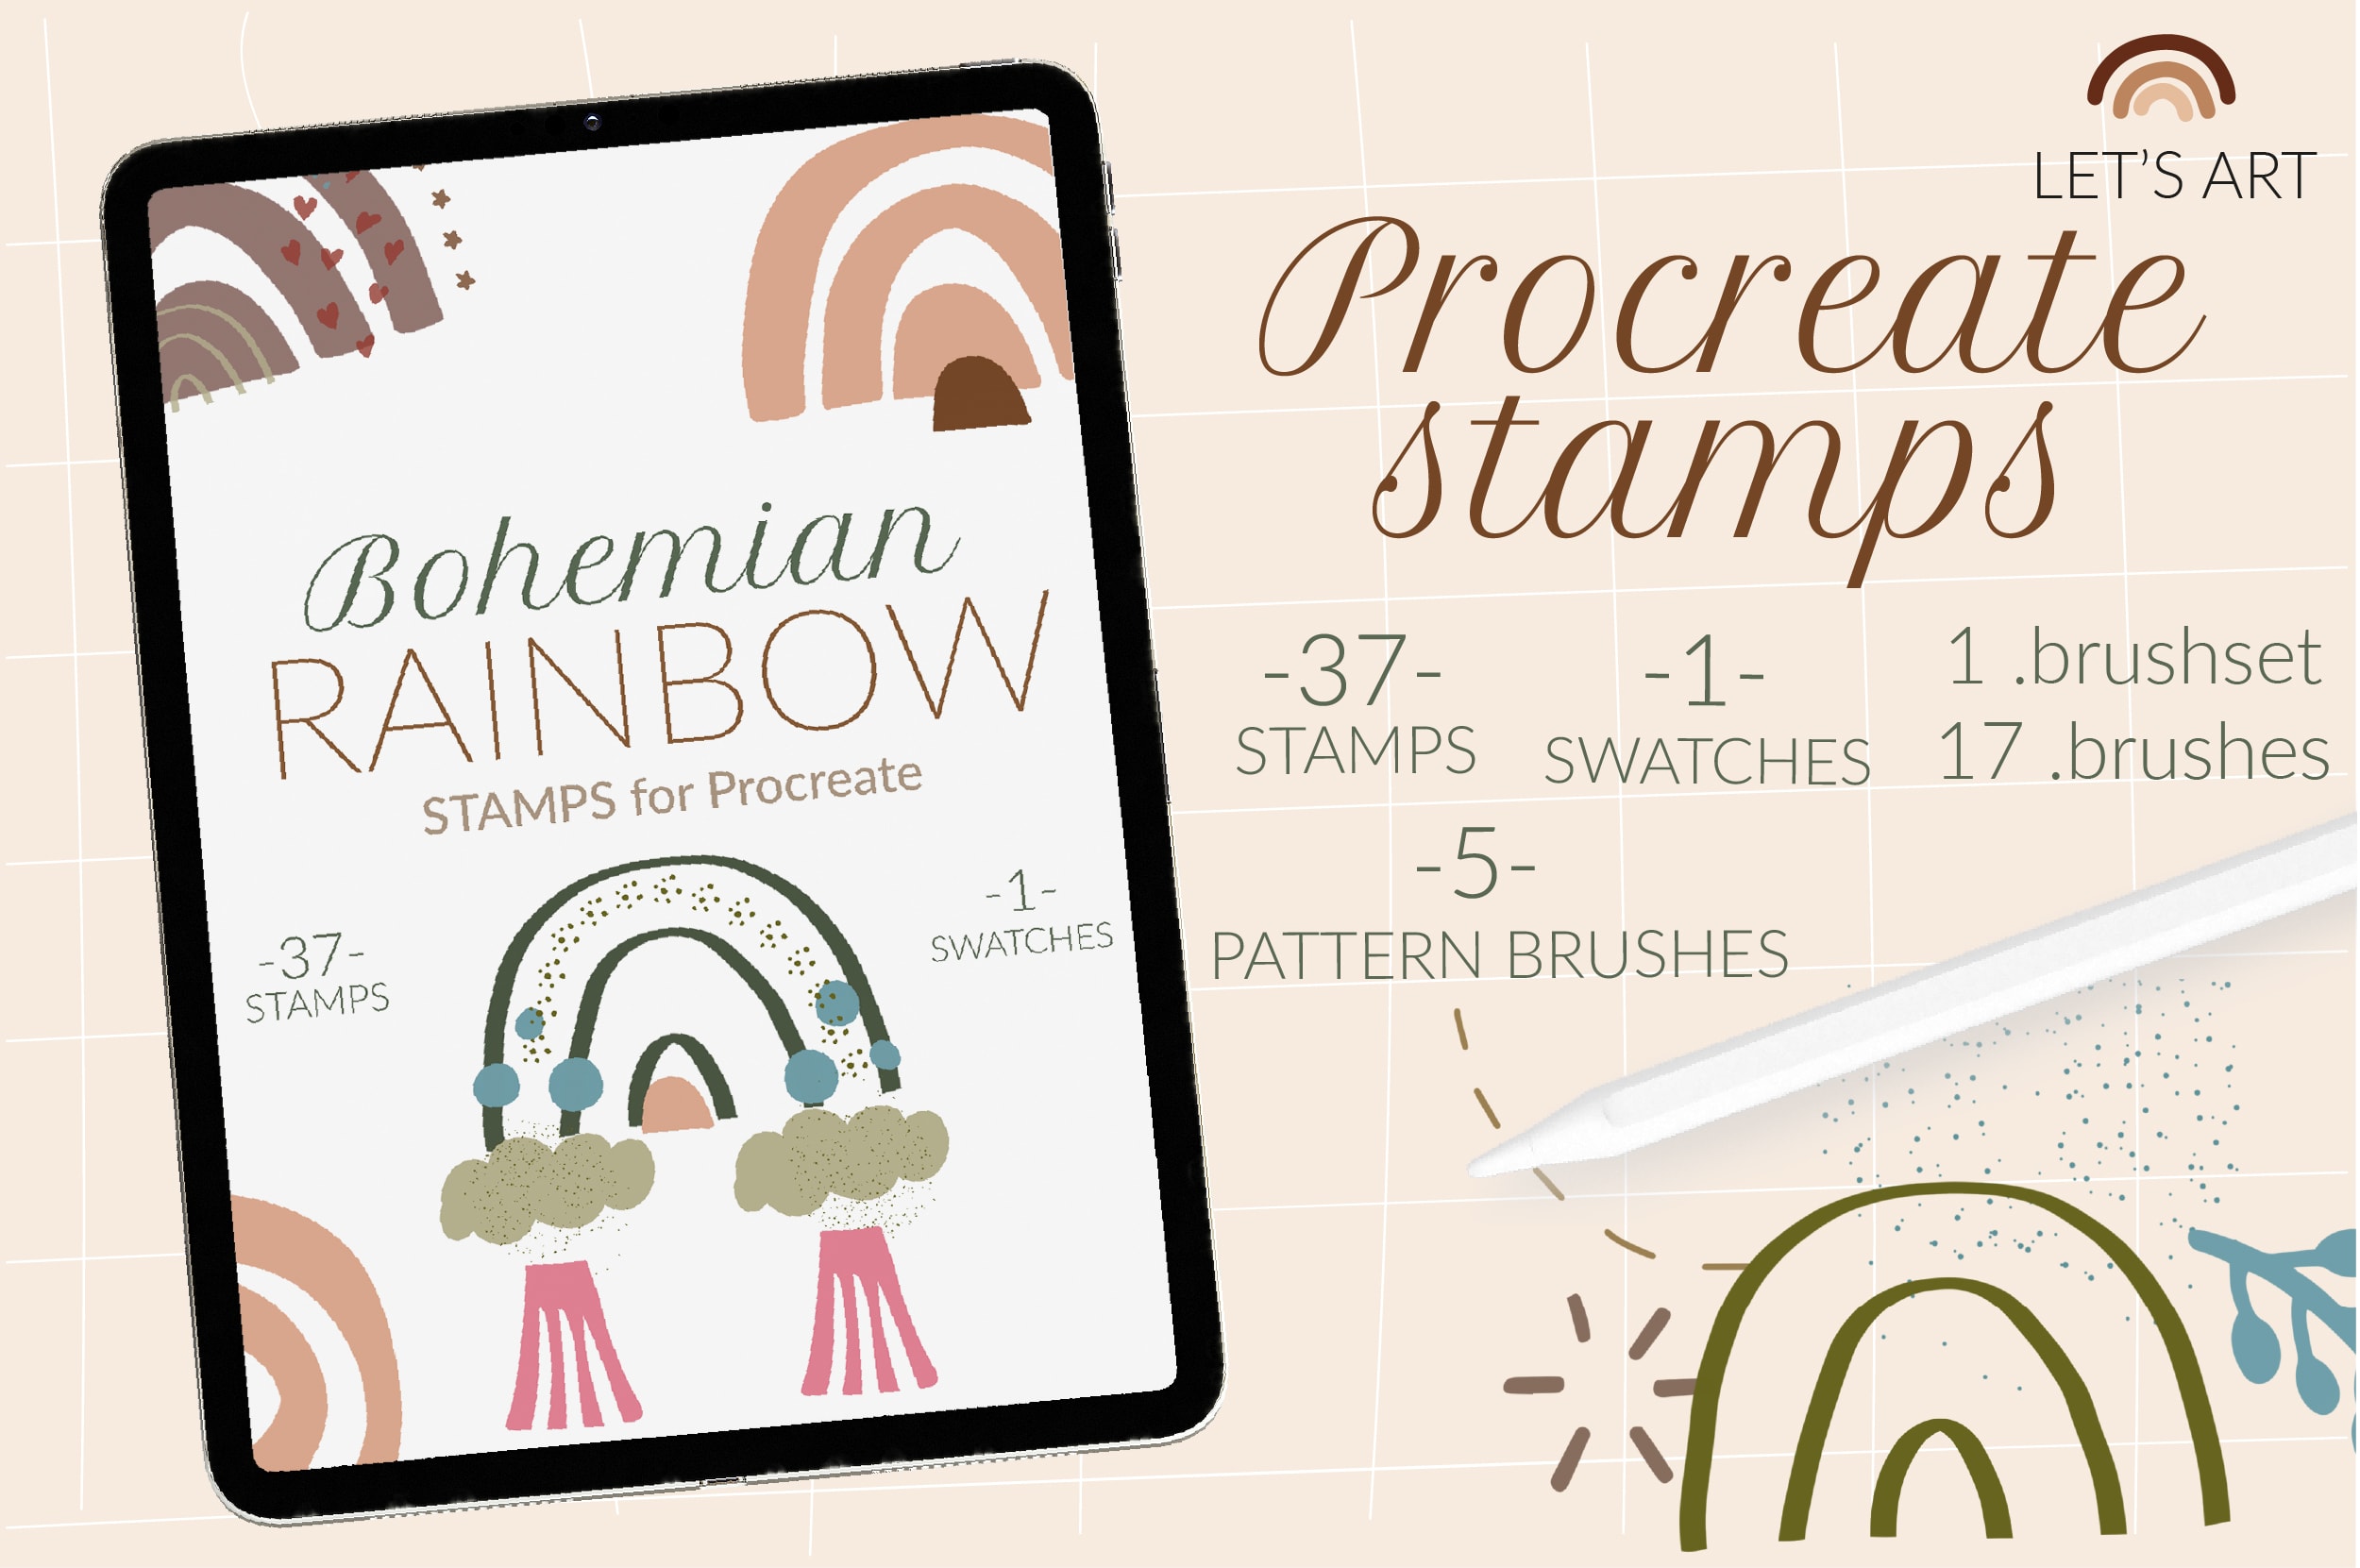 Bohemian rainbow stamps and pattern brushes